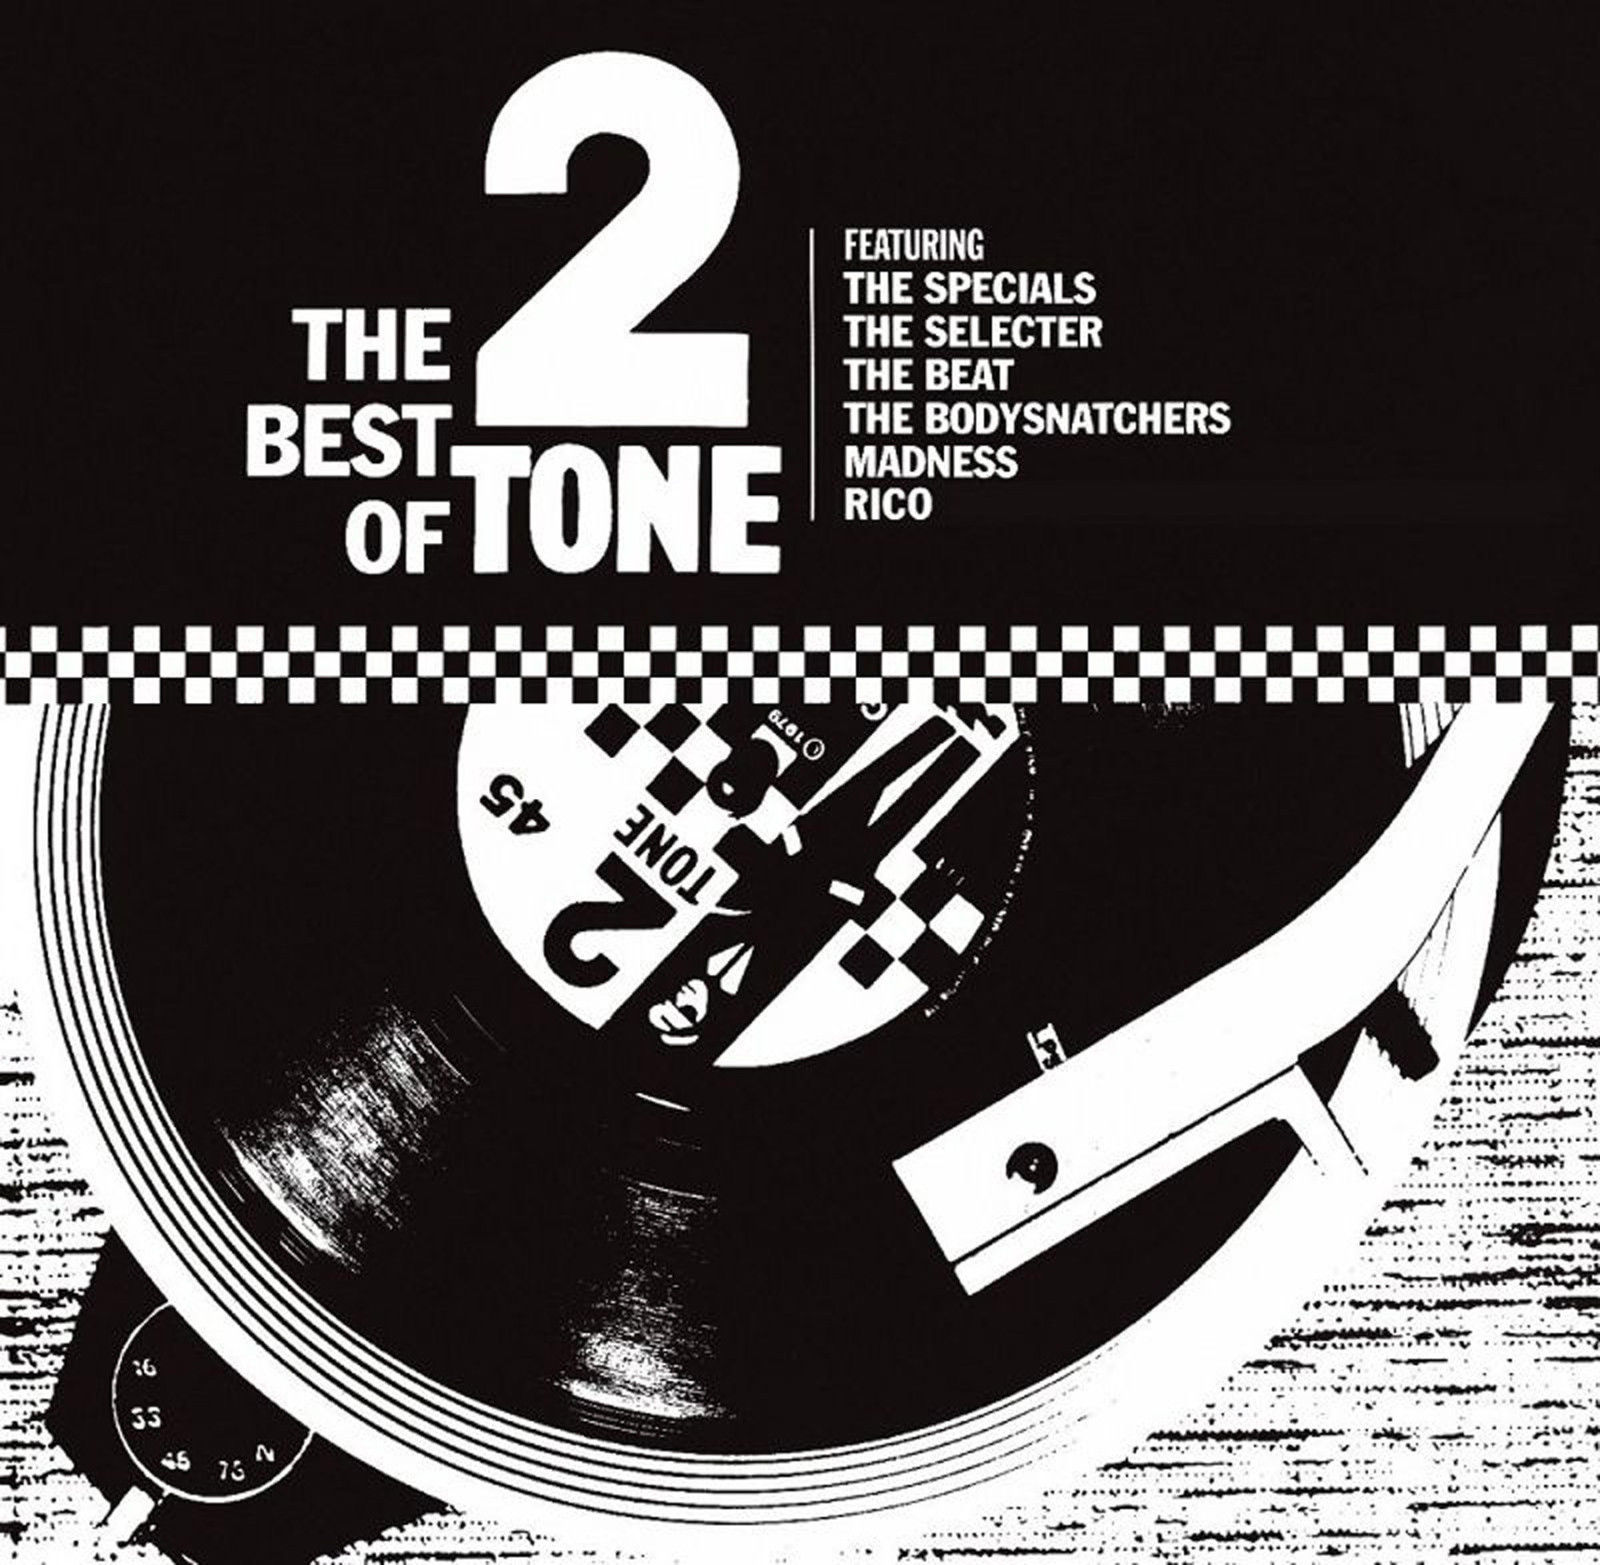 2-TONE The Best Of 2 Tone - Various Artists LP x 2 NEW Double Vinyl SEALED New